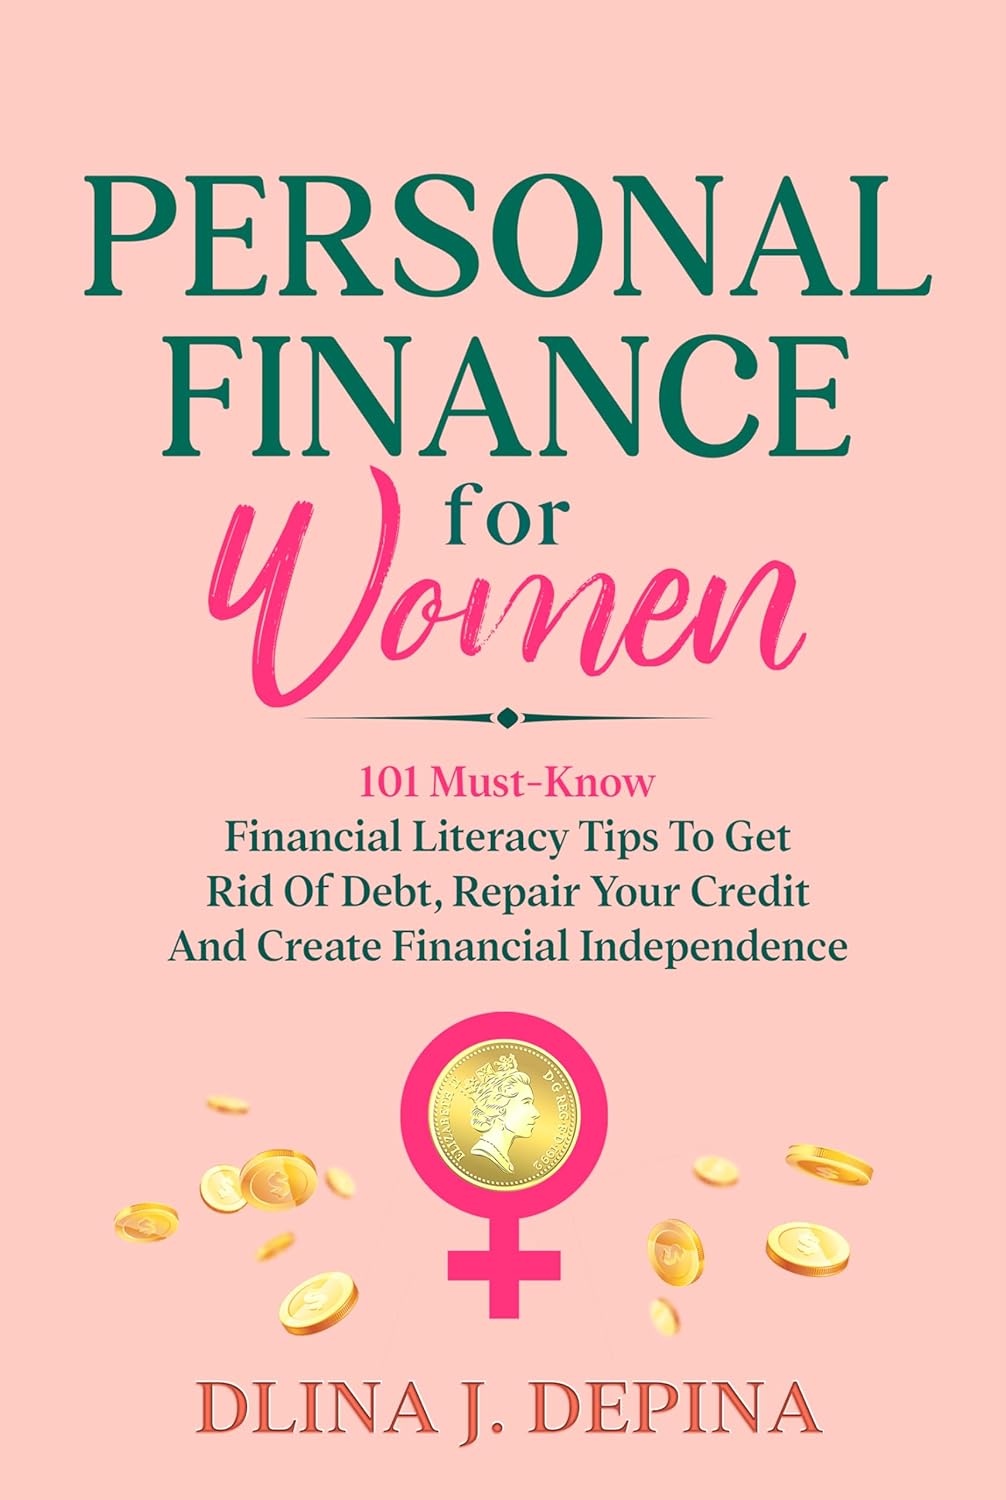 Personal Finance for Women by Dlina J. Depina